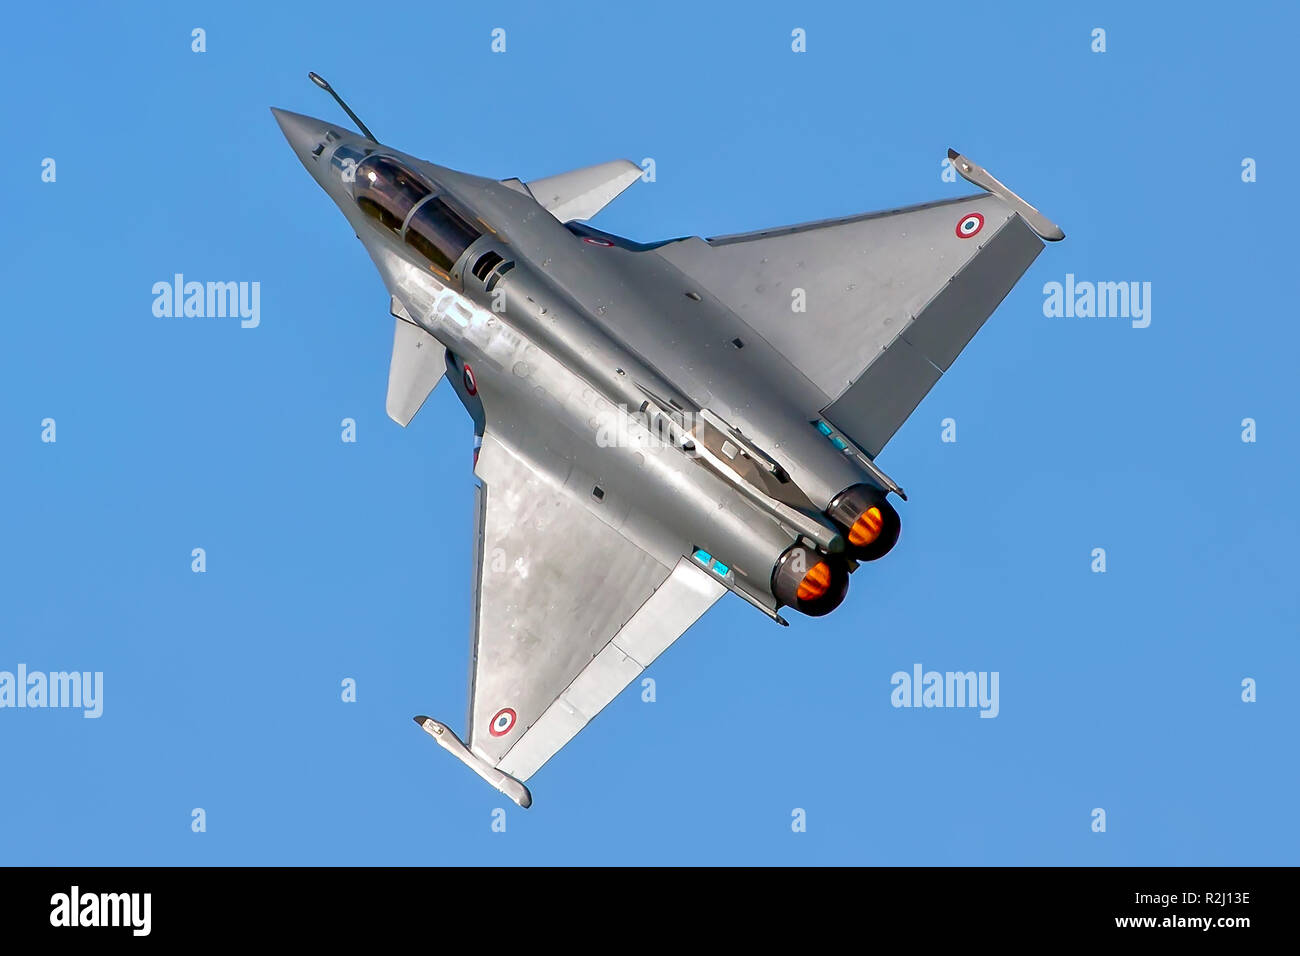 Dassault Rafale is a French twin-engine, canard delta wing, multirole fighter aircraft designed and built by Dassault Aviation. Equipped with a wide r Stock Photo